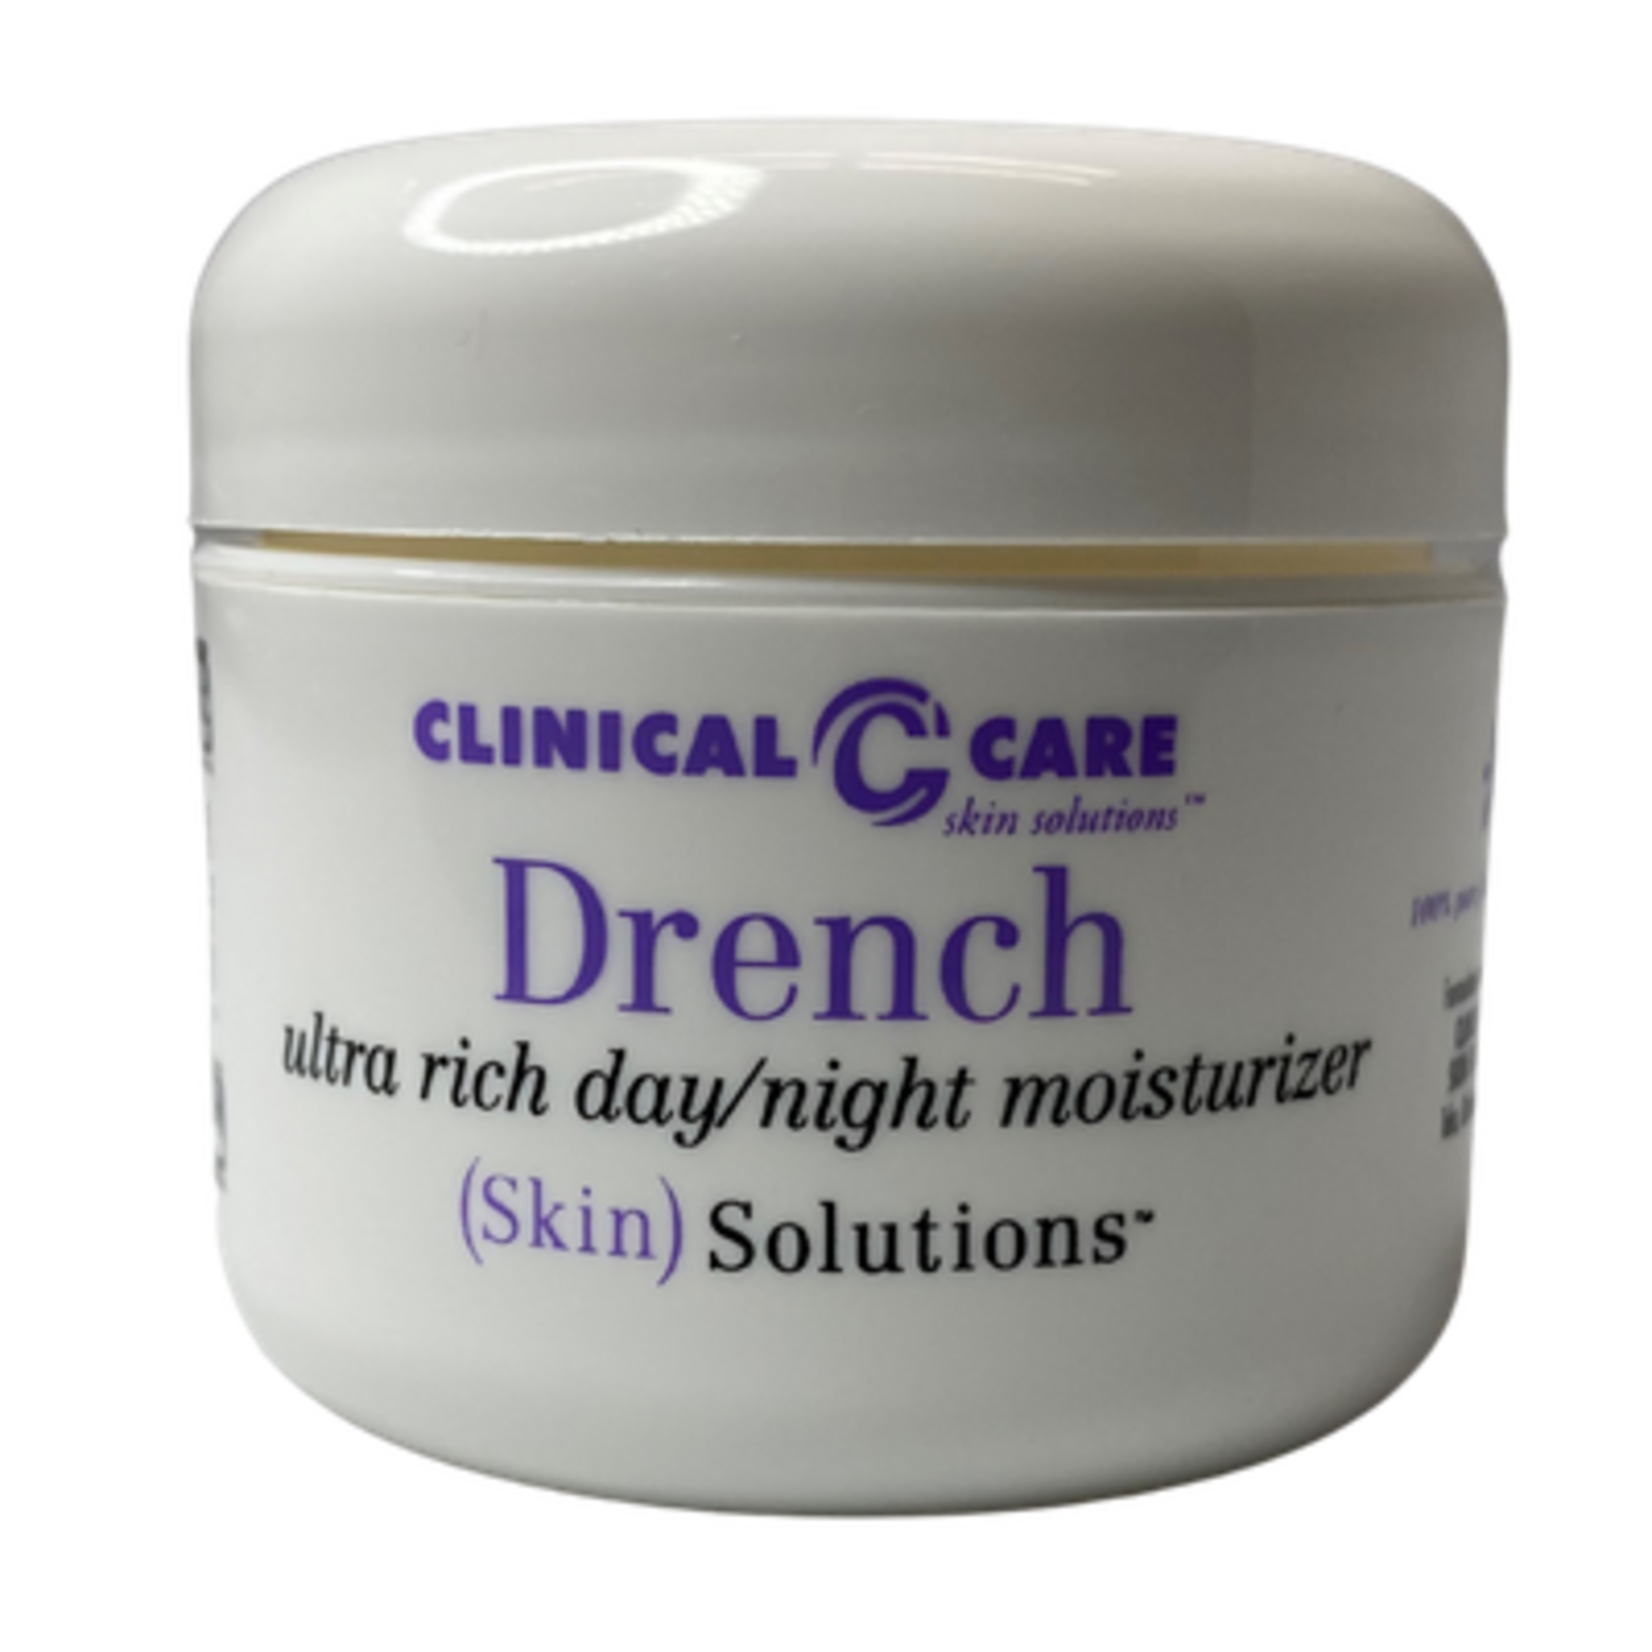 Clinical Care Clinical Care Skin Solutions Drench 2oz